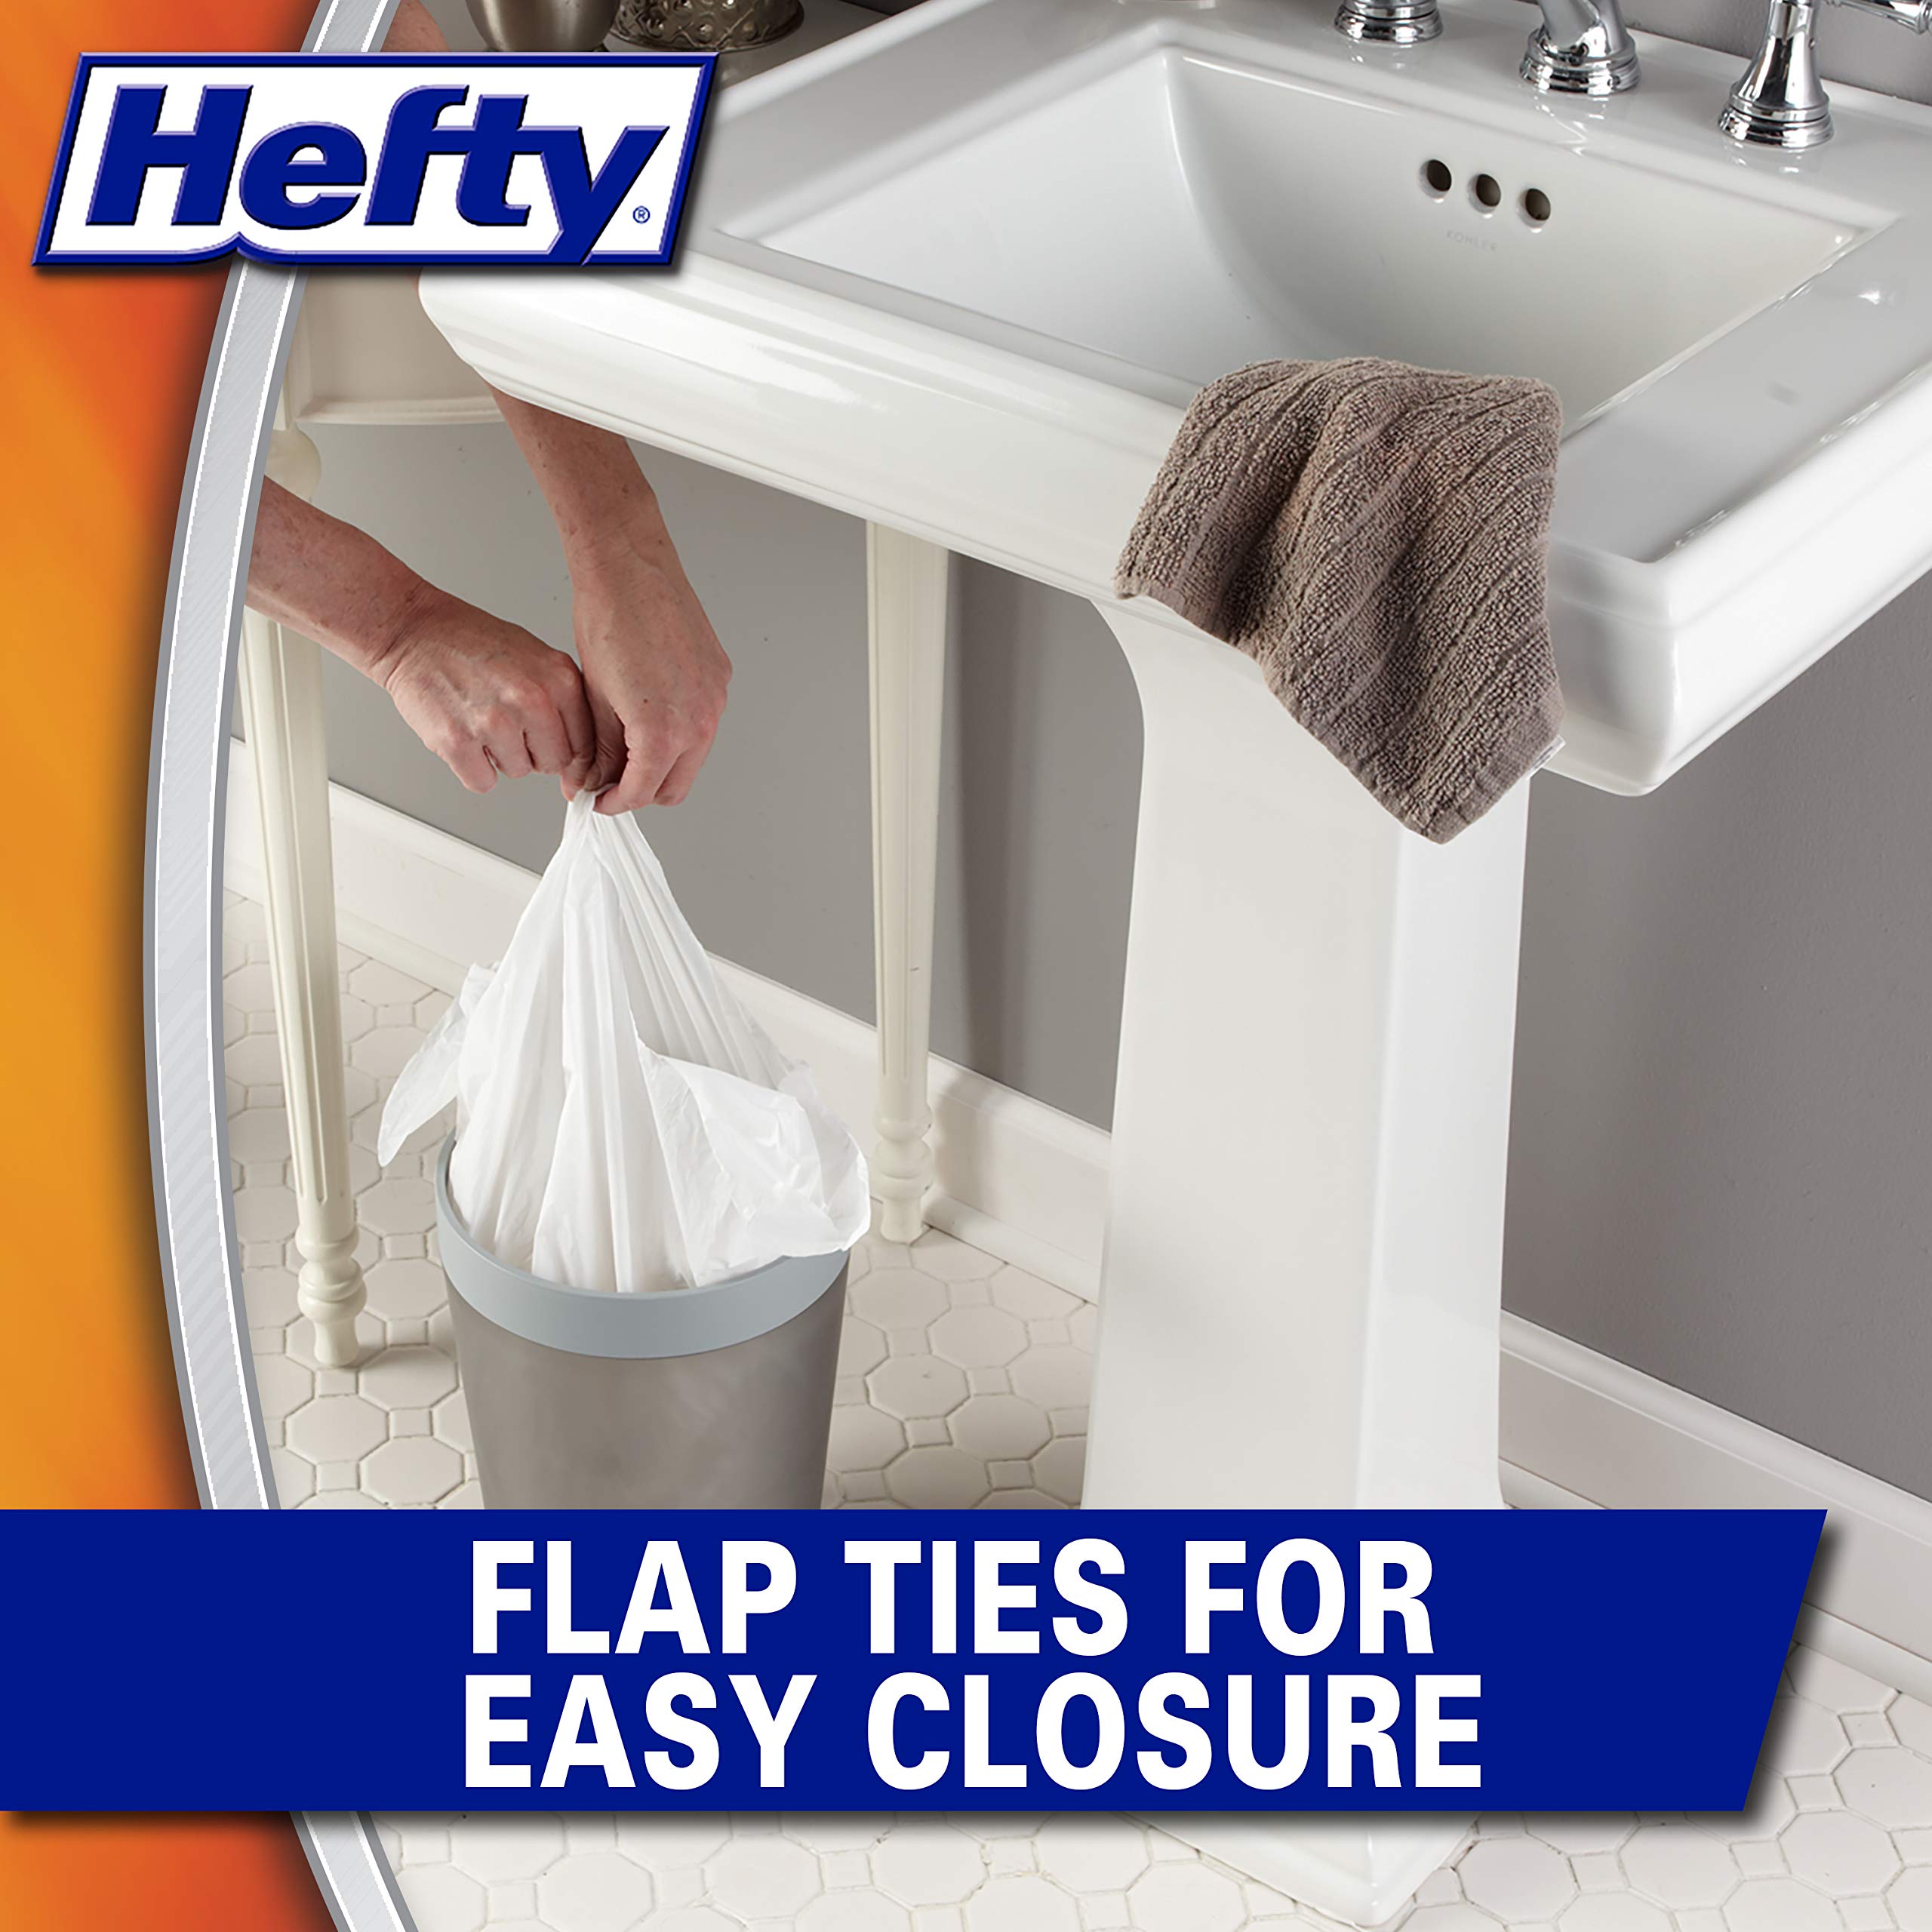 Hefty Flap Tie Small Trash Bags - Clean Burst, 4 Gallon, 312 Total,26 Count (Pack of 12)